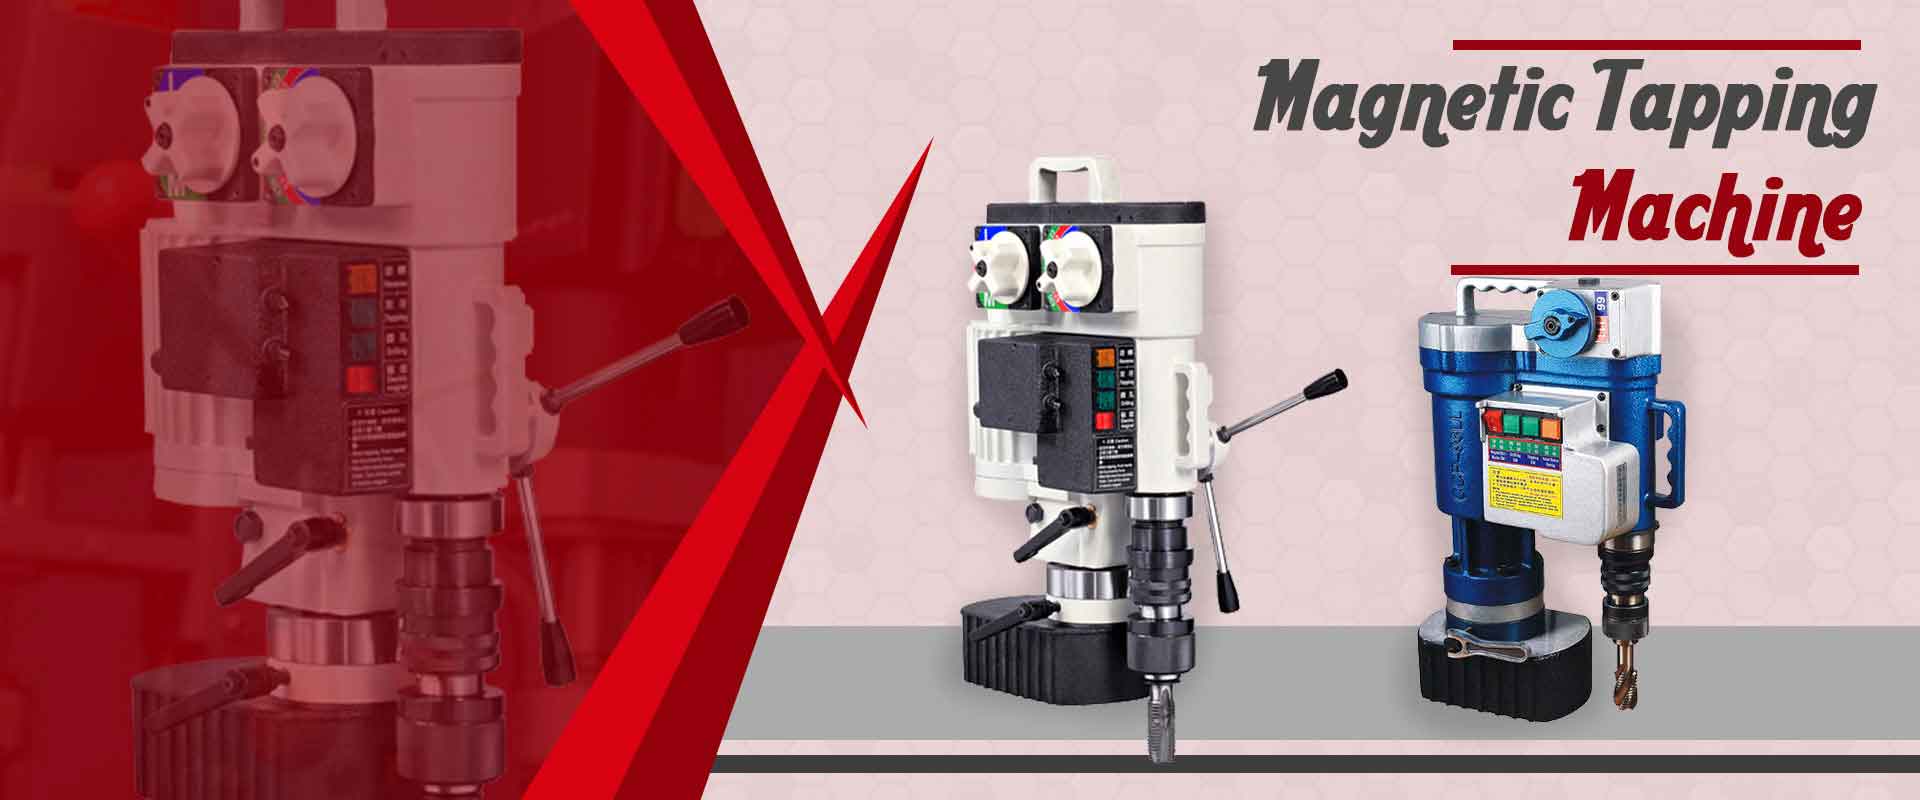 Magnatic Tapping Machine Manufacturers